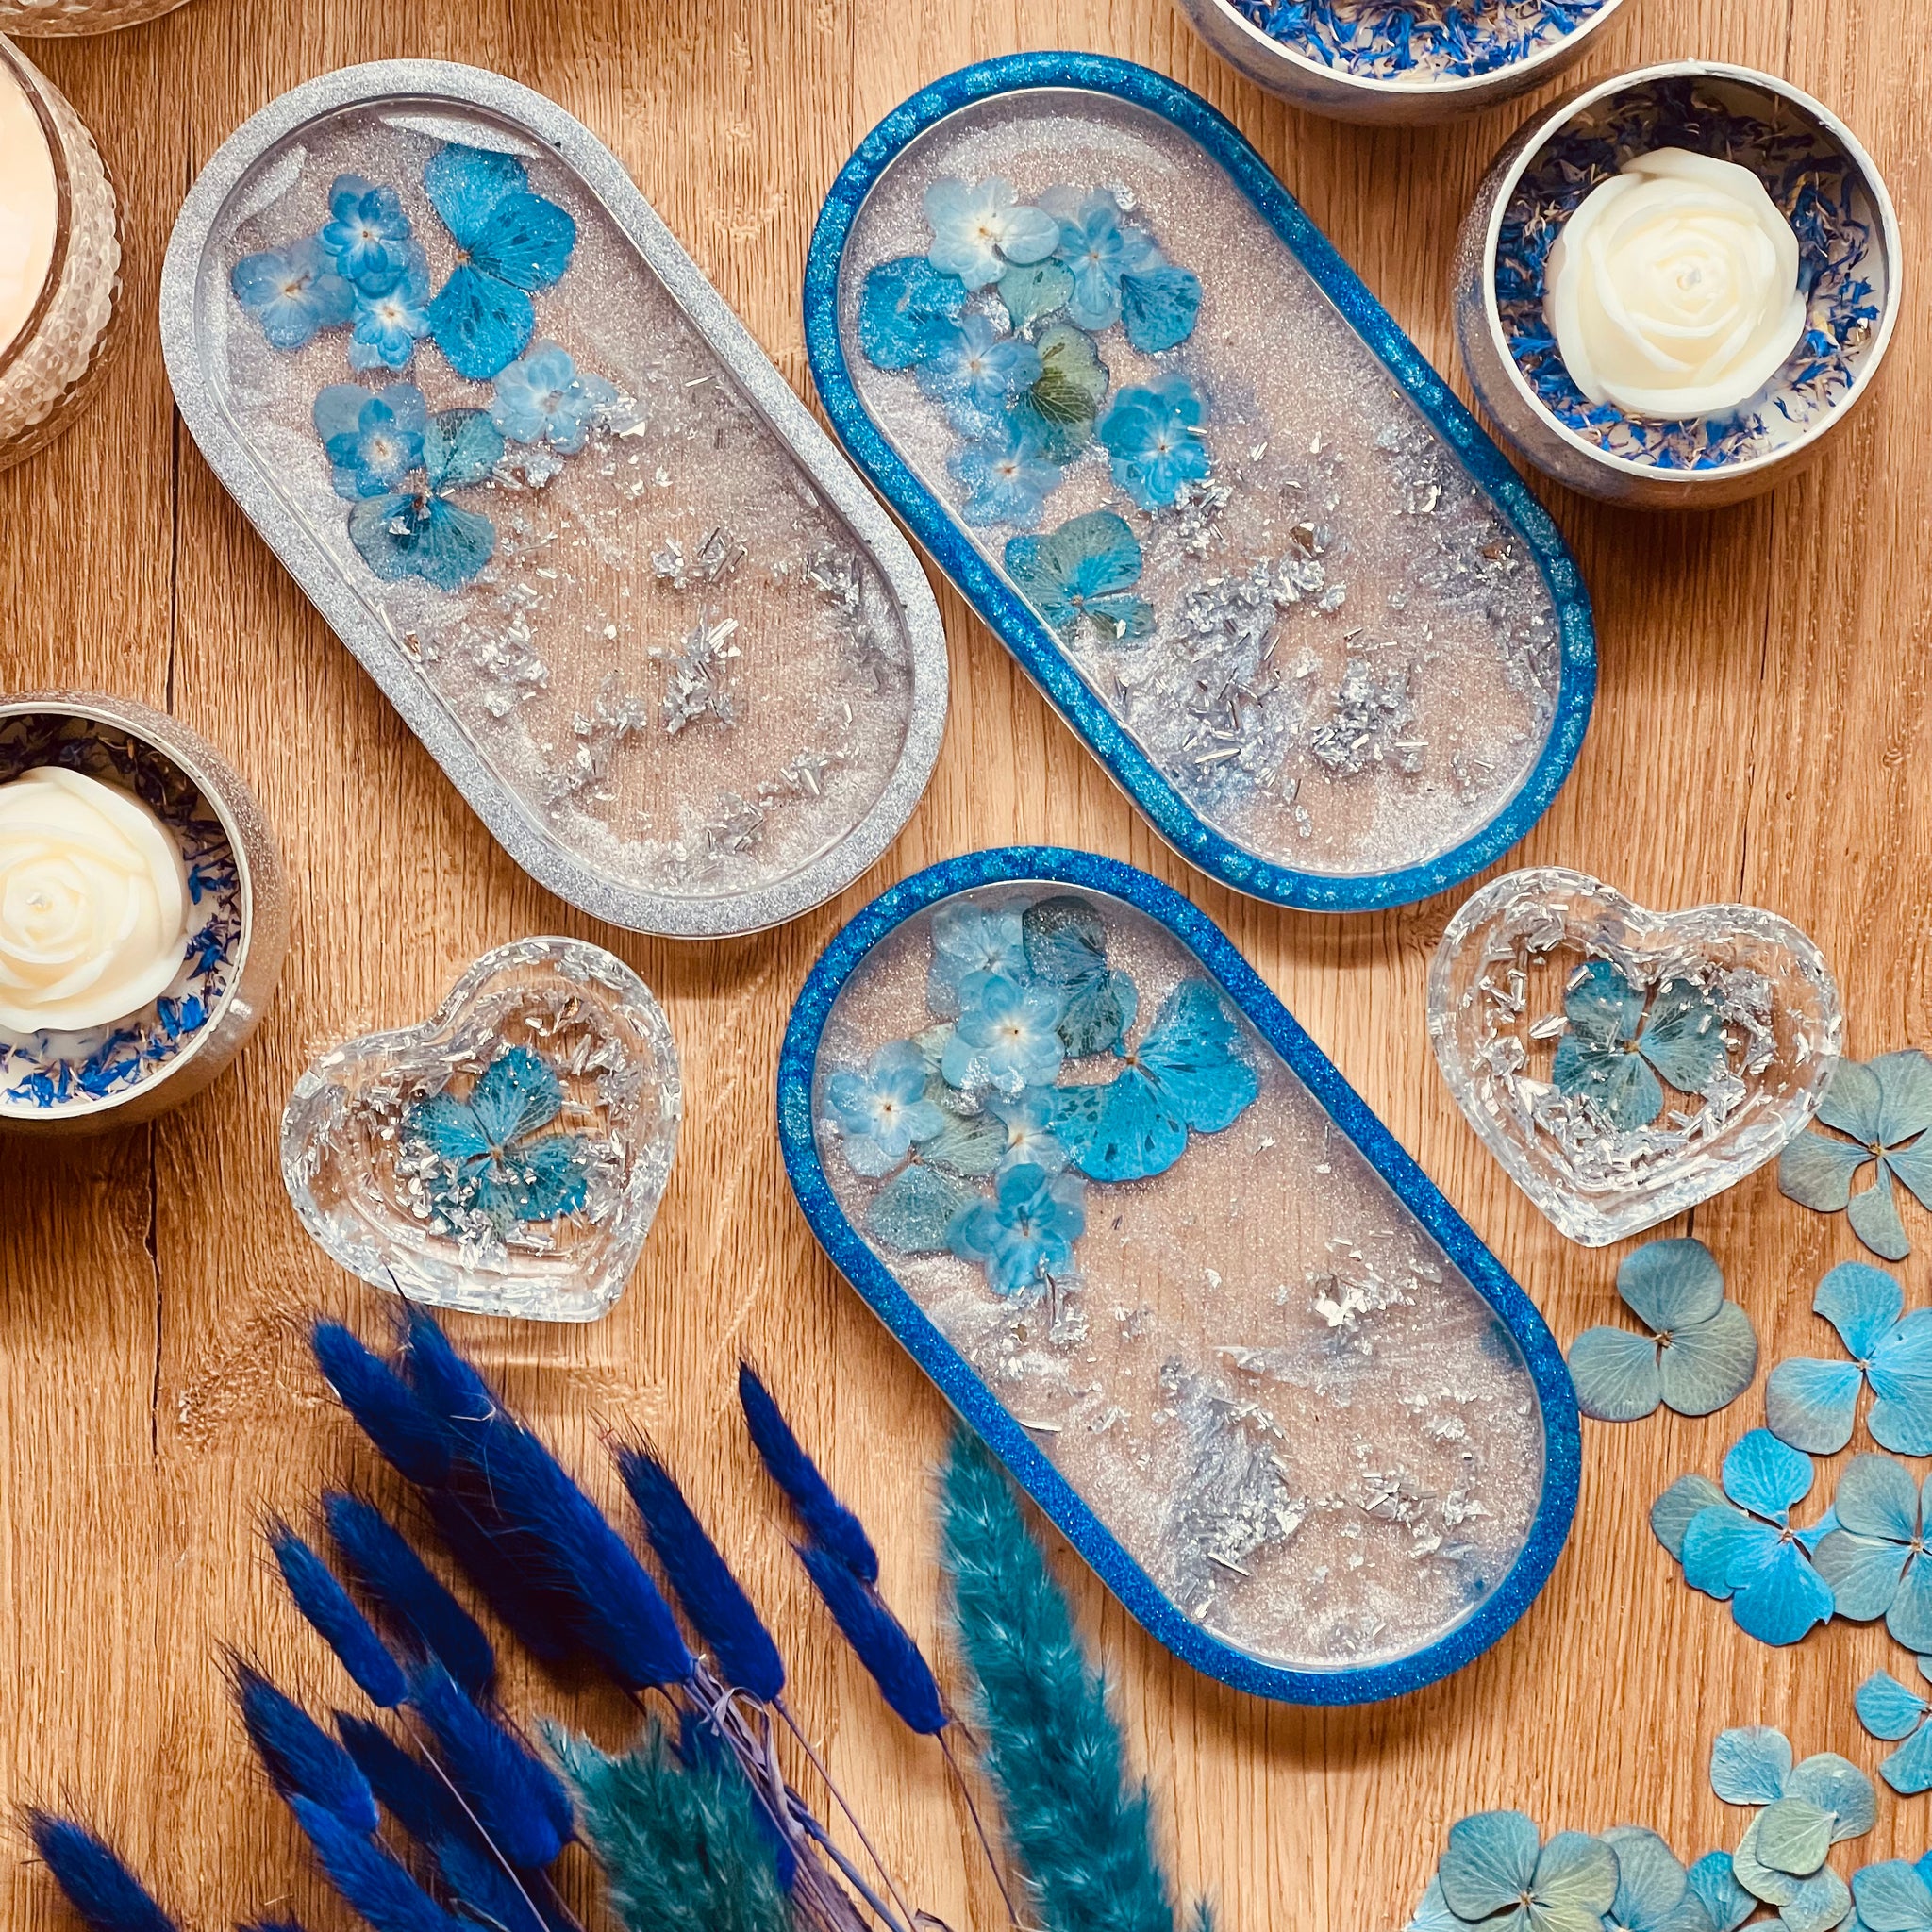 Resin jewelery bowls in blue with silver and flowers